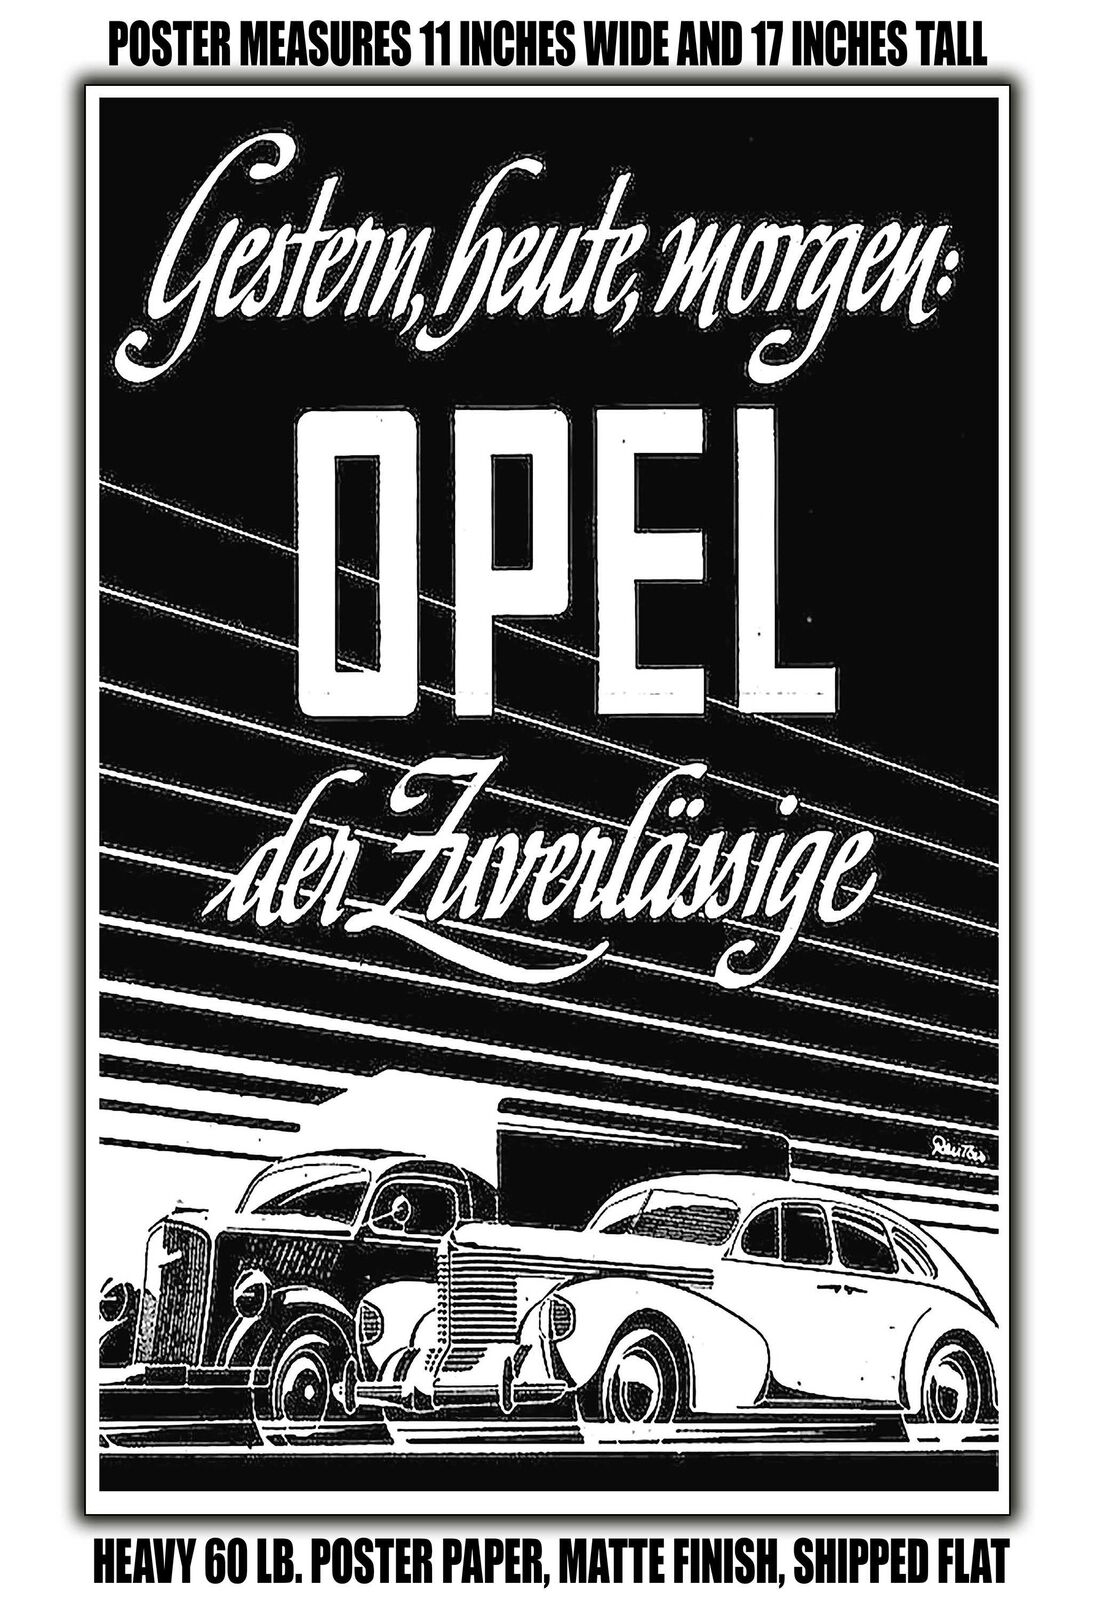 11x17 POSTER - 1942 Opel Yesterday, today, tomorrow Opel, the reliable one